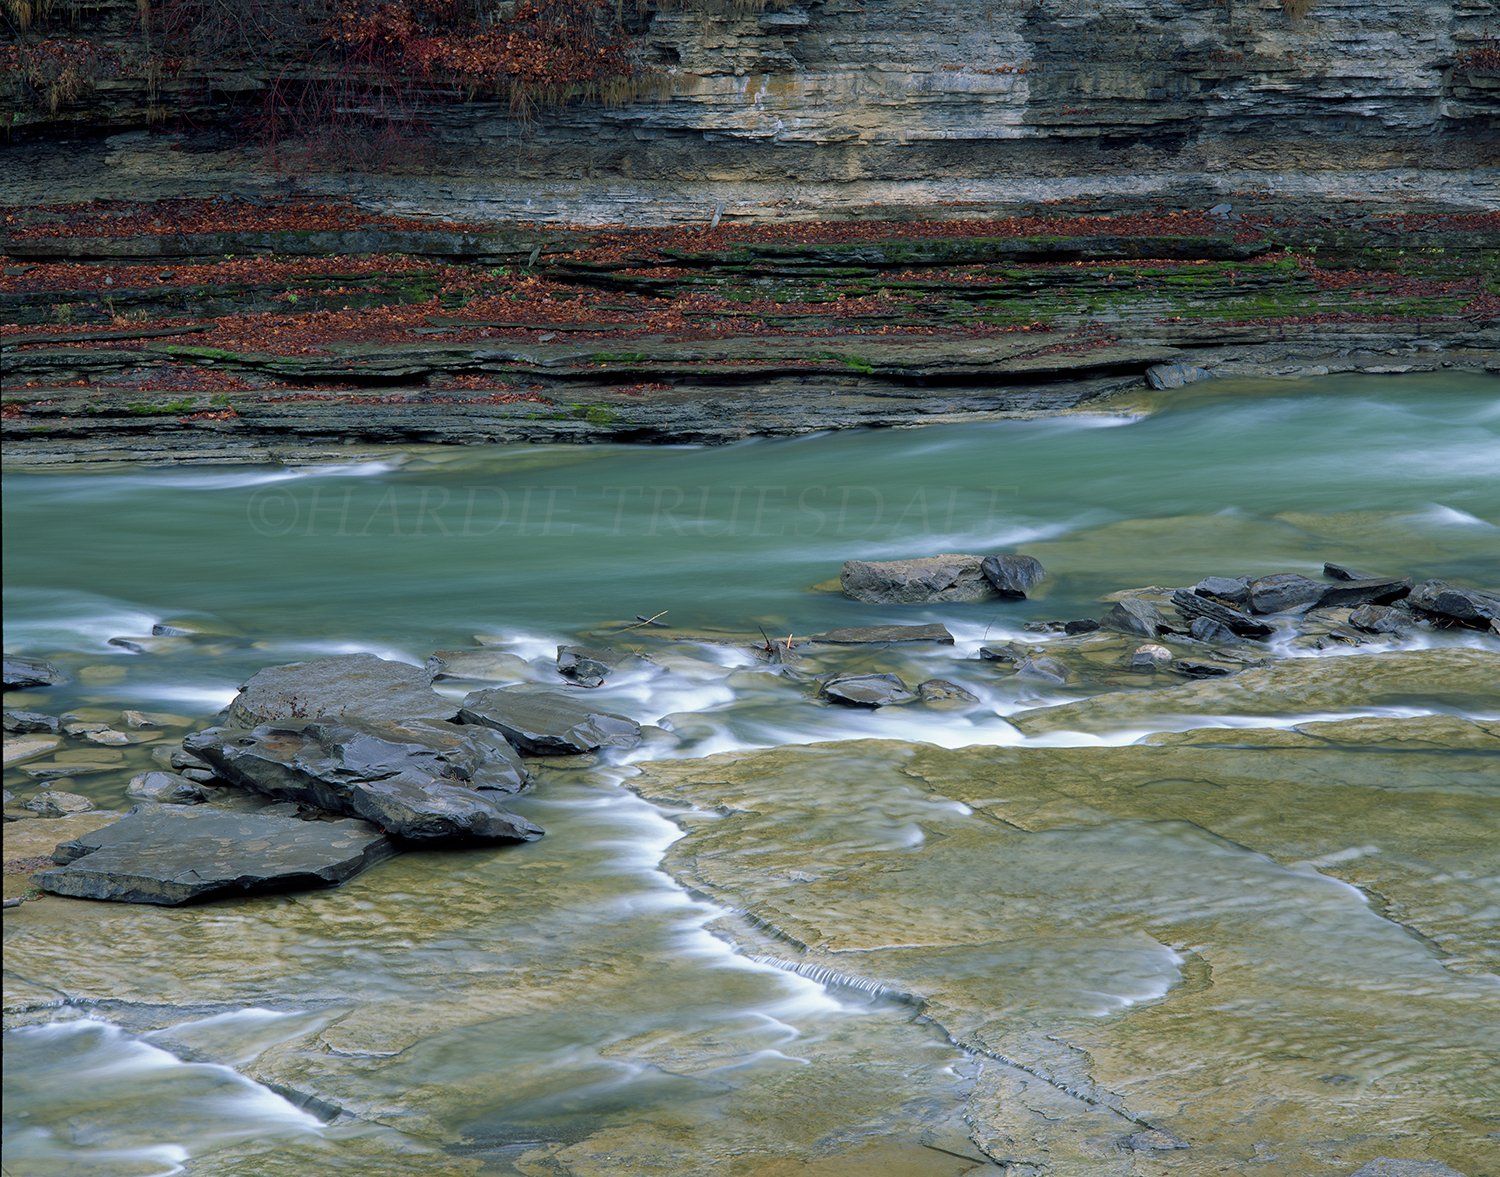 WNY#24 Sedimentary Layers, Genesee River, Letchworth State Park